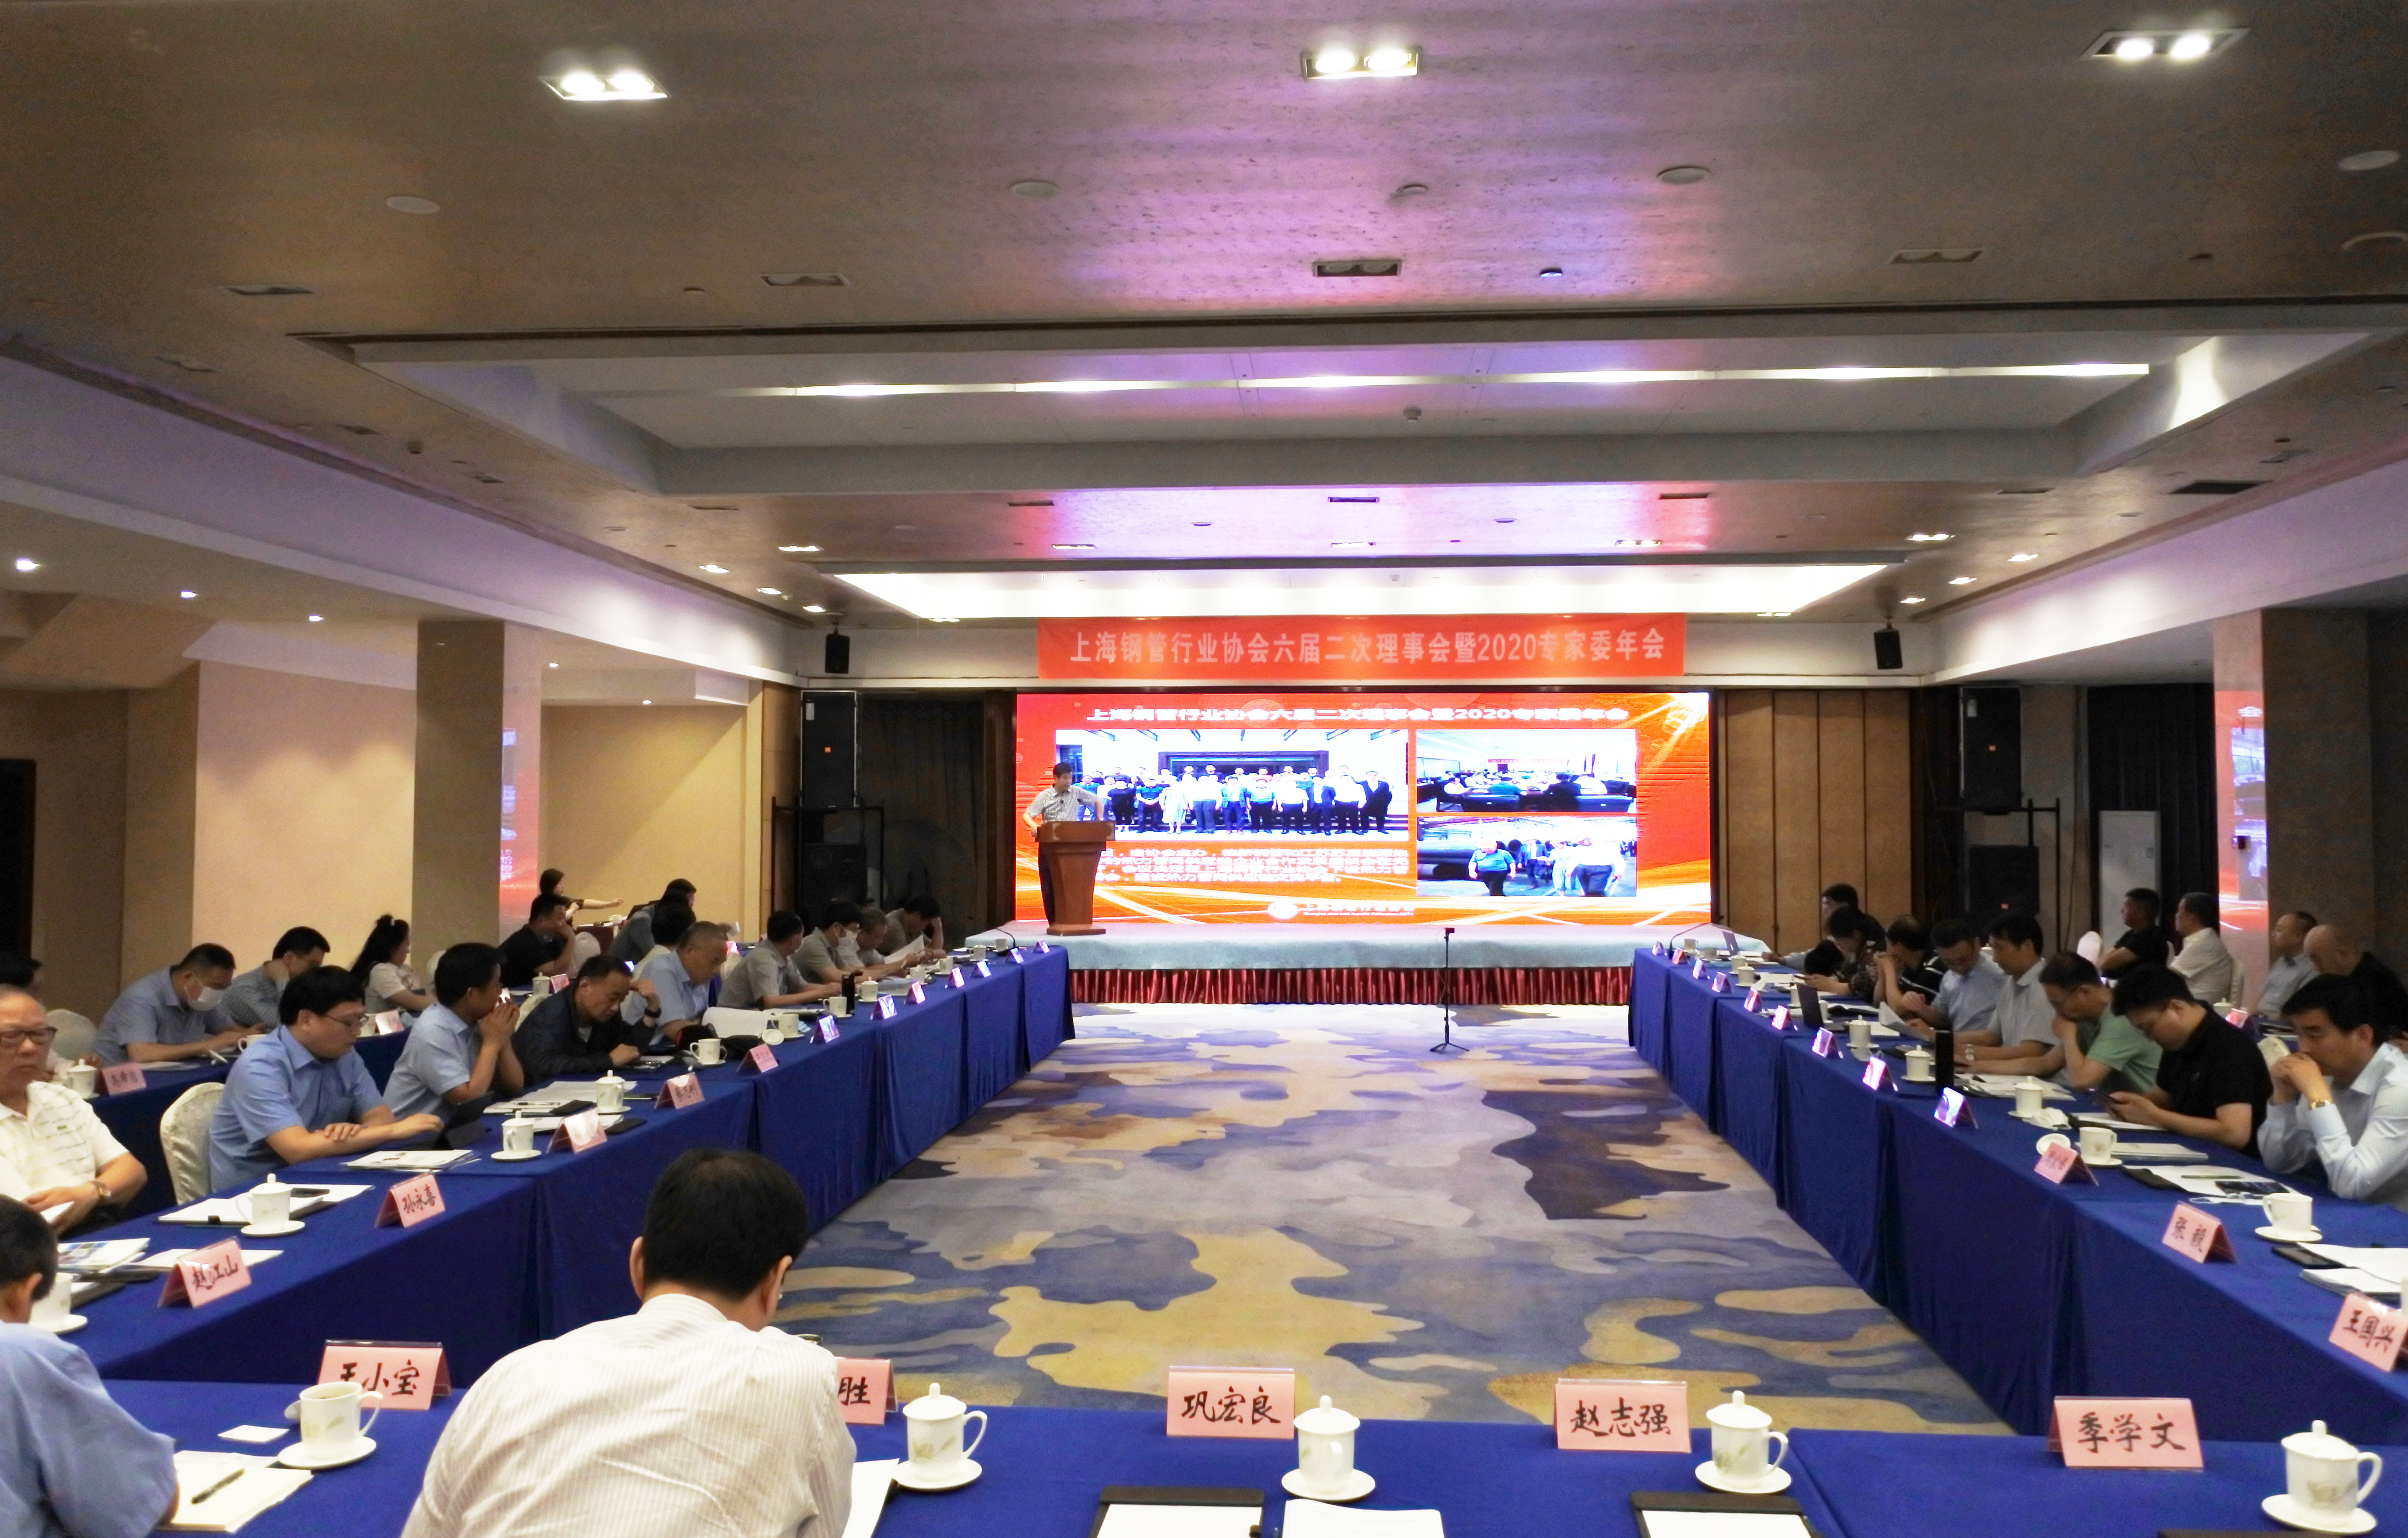 The Second Council of the Sixth Shanghai Steel Pipe Industry Association was held in Jiande